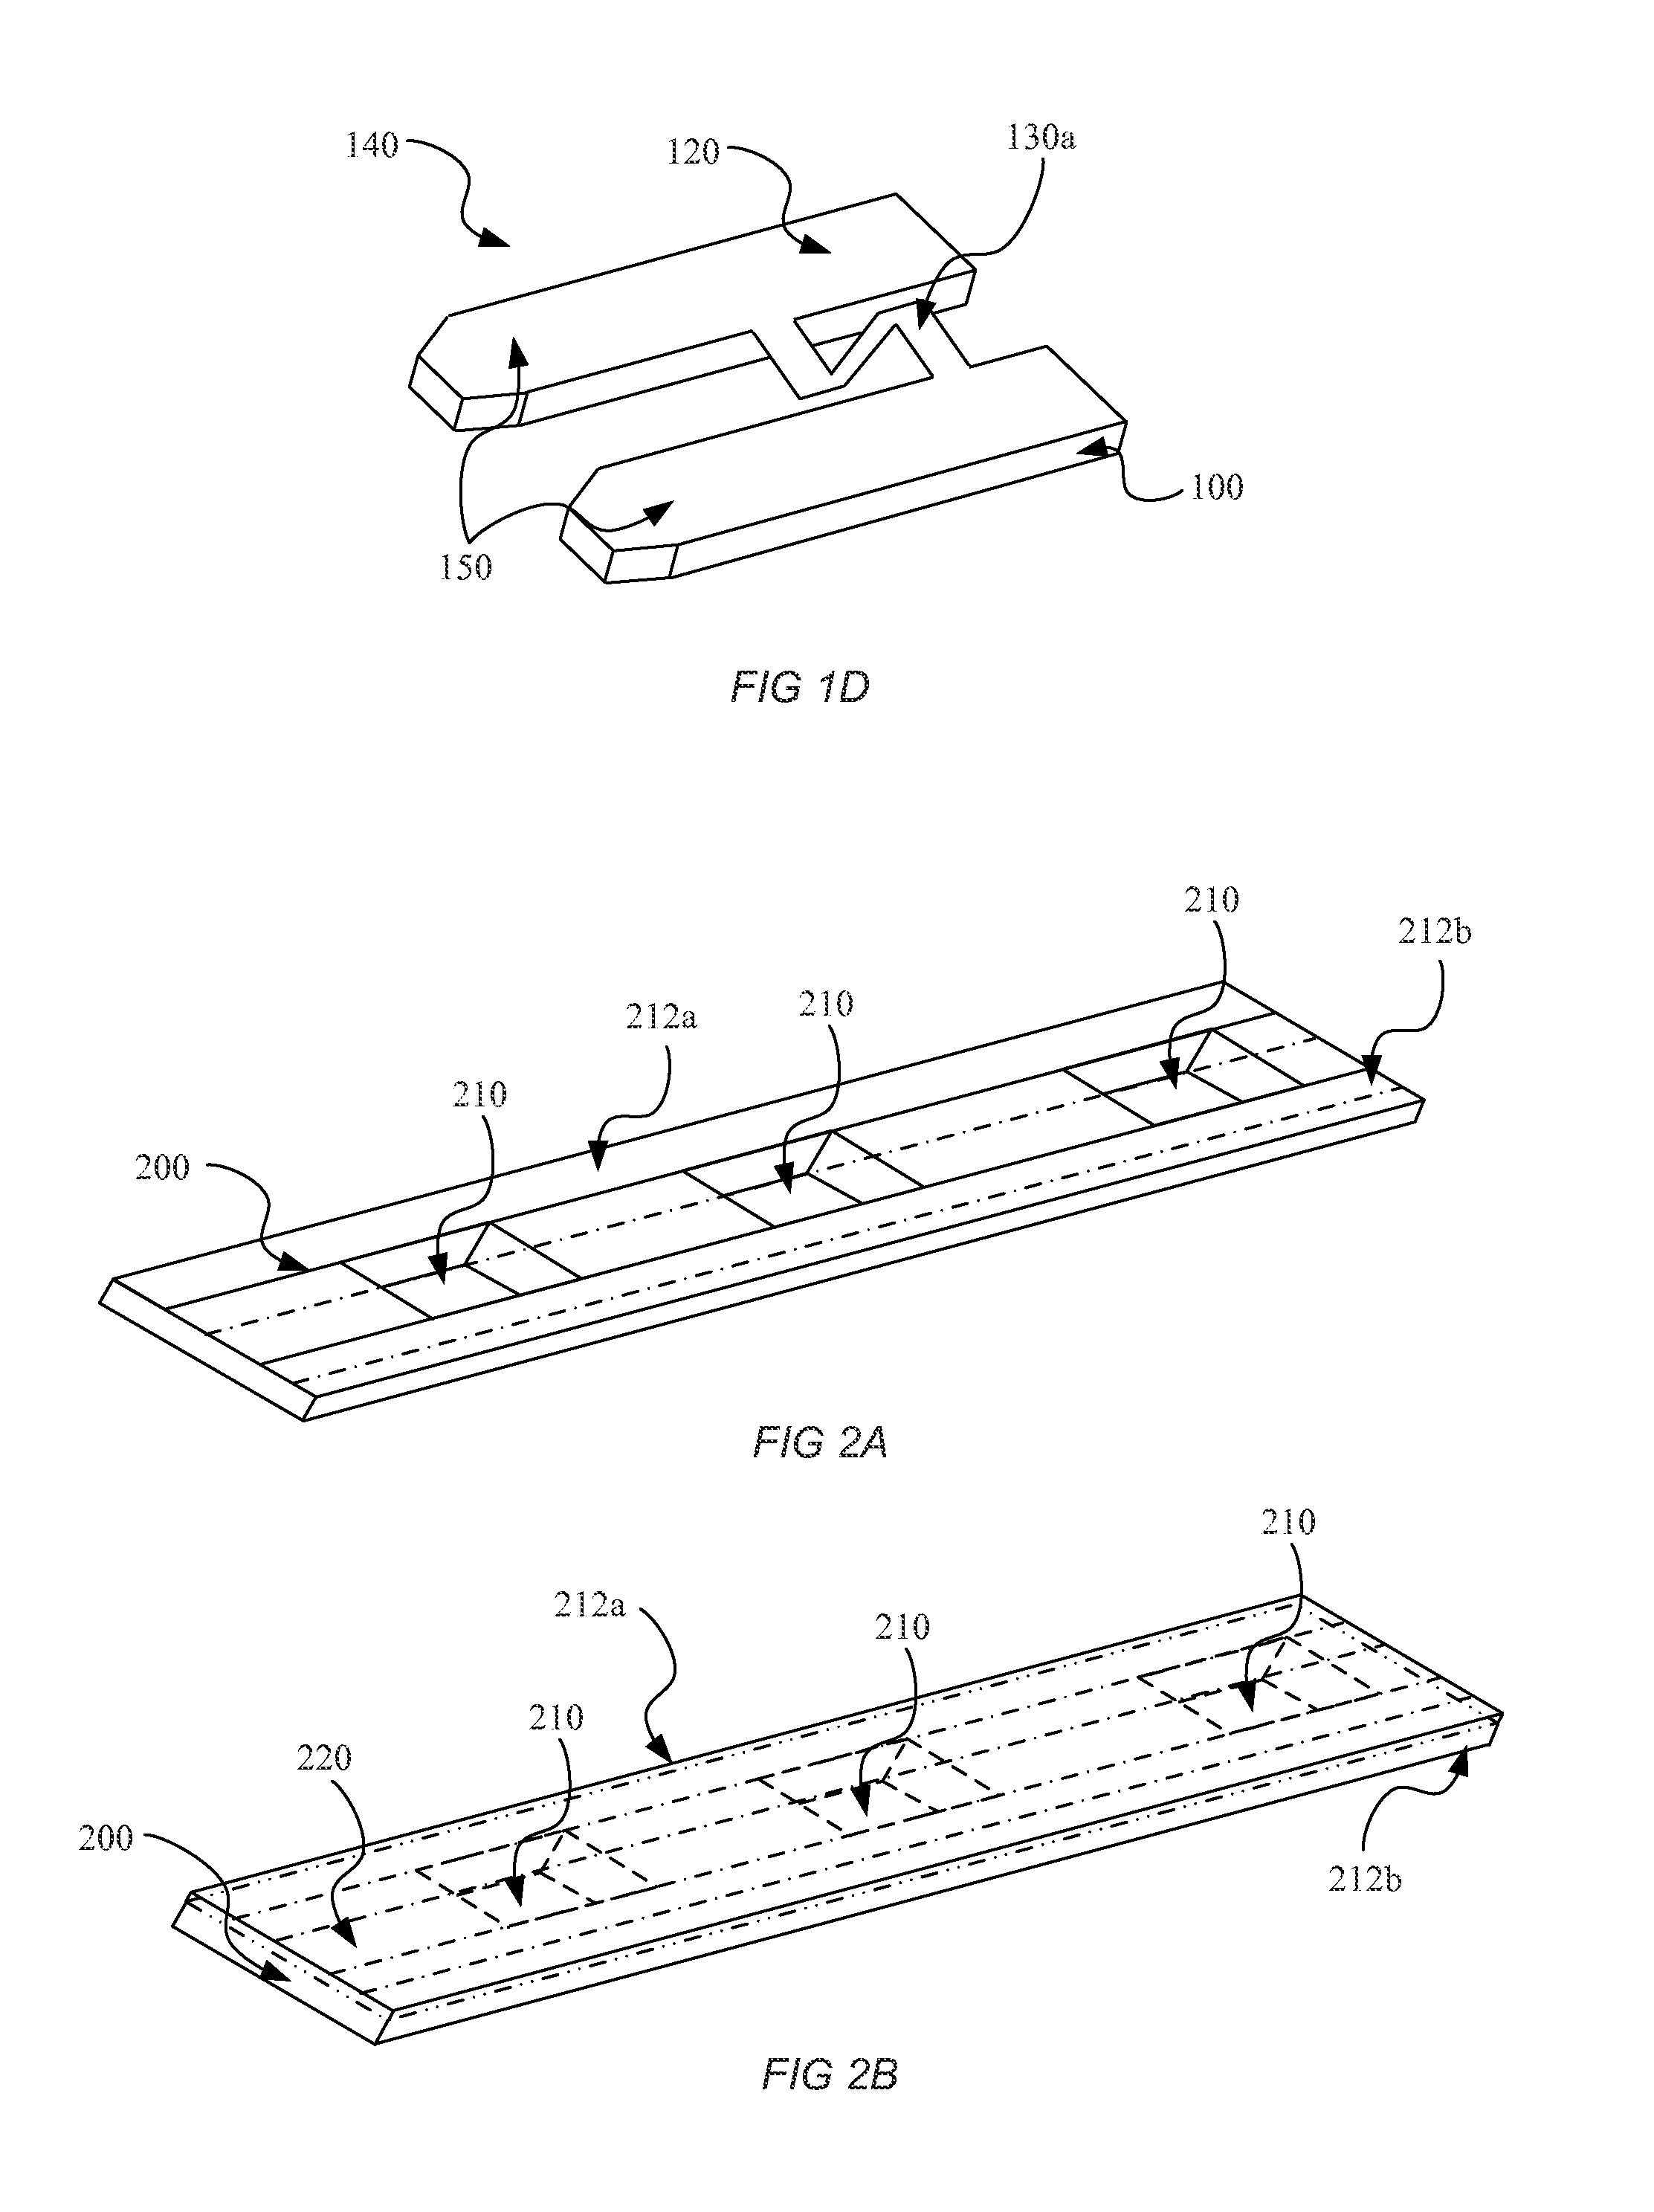 Low-current fuse stamping method